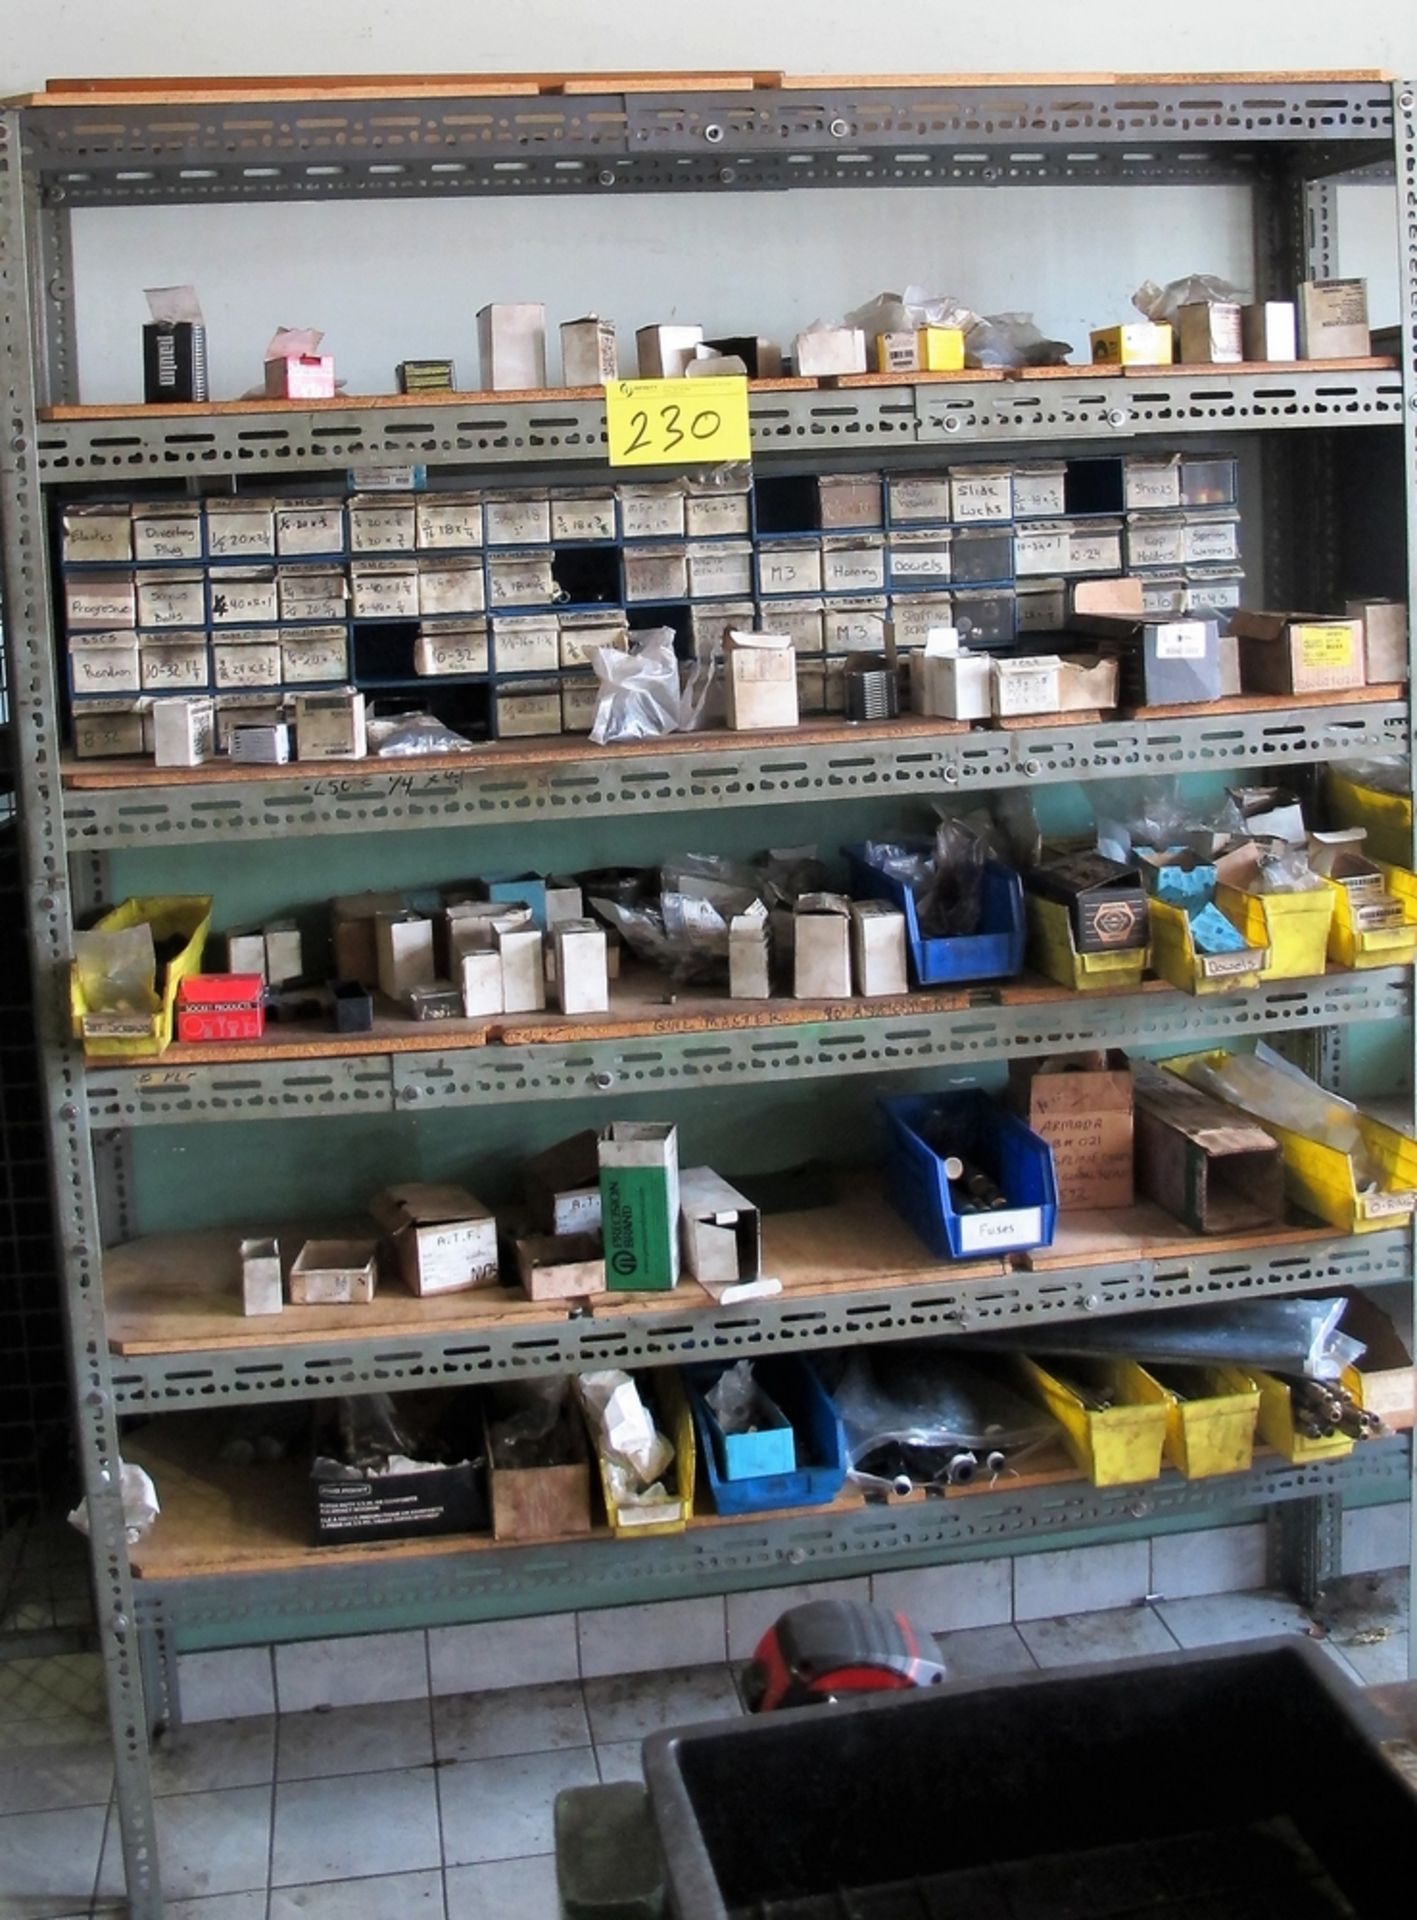 LOT OF (2) SECTIONS OF METAL SHELVING W/ CONTENTS, SHANKS, RADIUS GAUGES, FITTINGS, HARDWARE, ETC.